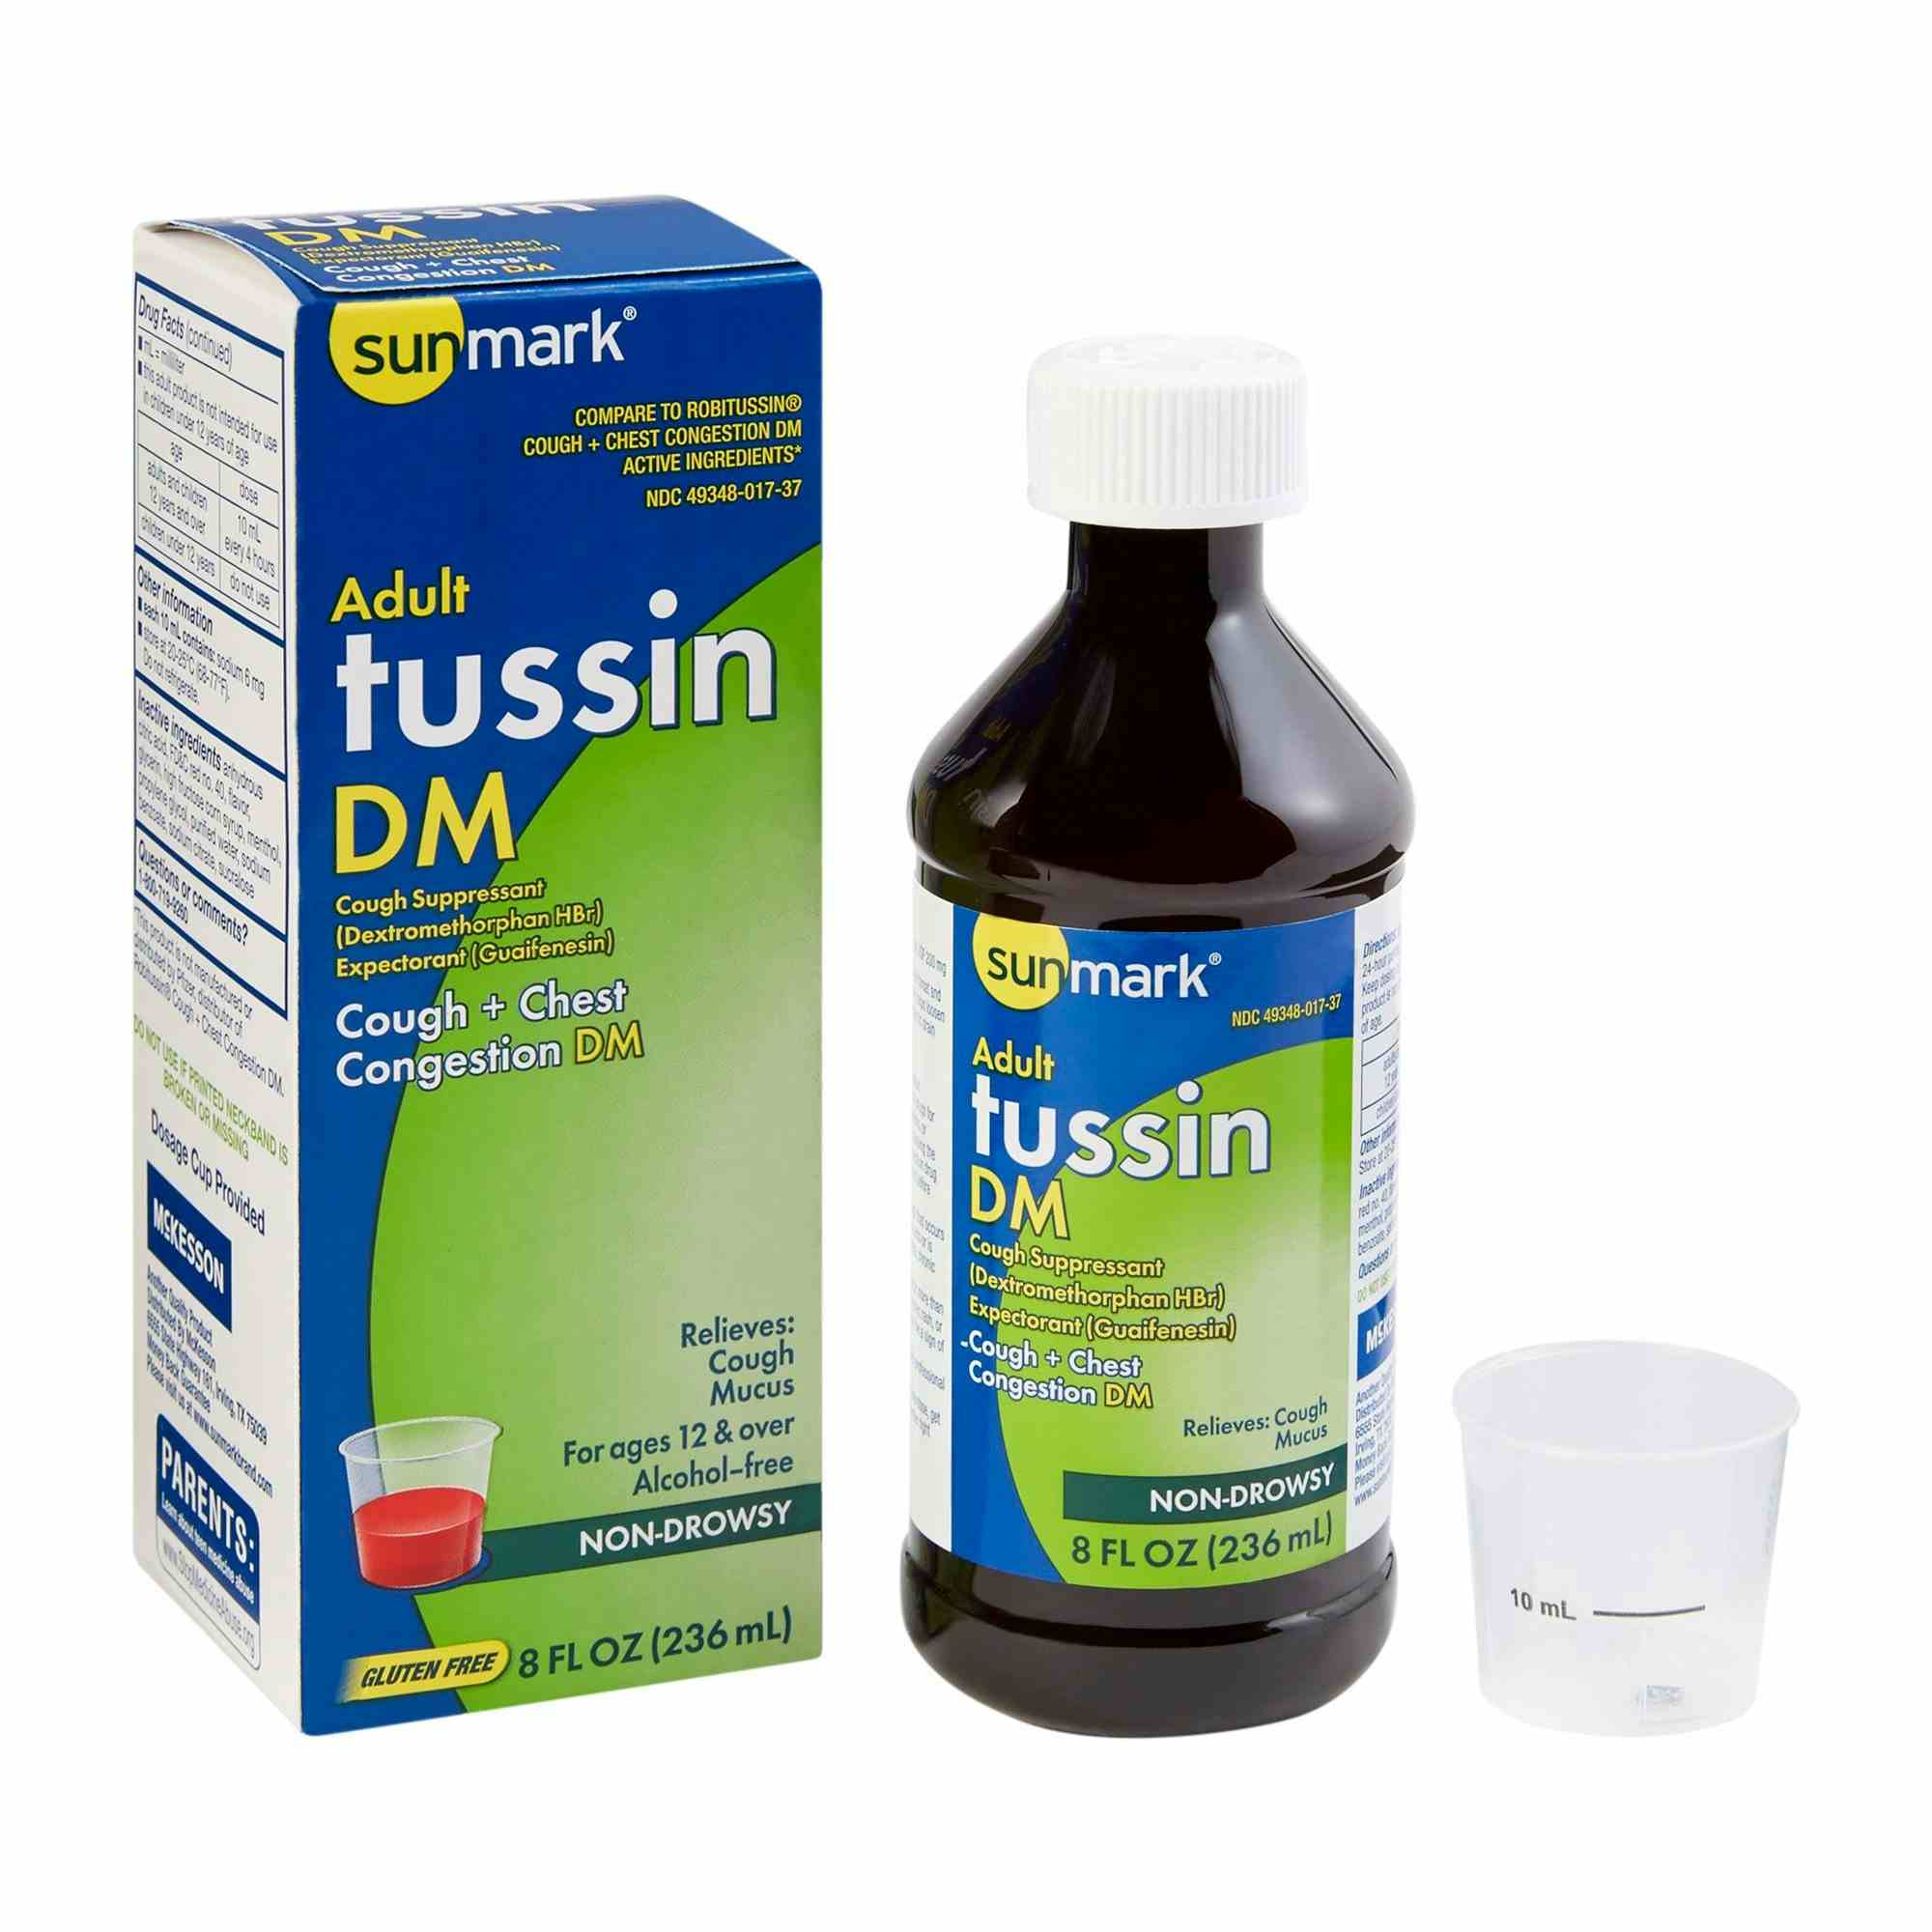 Sunmark Adult Tussin DM Cough + Chest Congestion Suppressant, 100 mg, 49348001737, 8 oz. - 1 Each